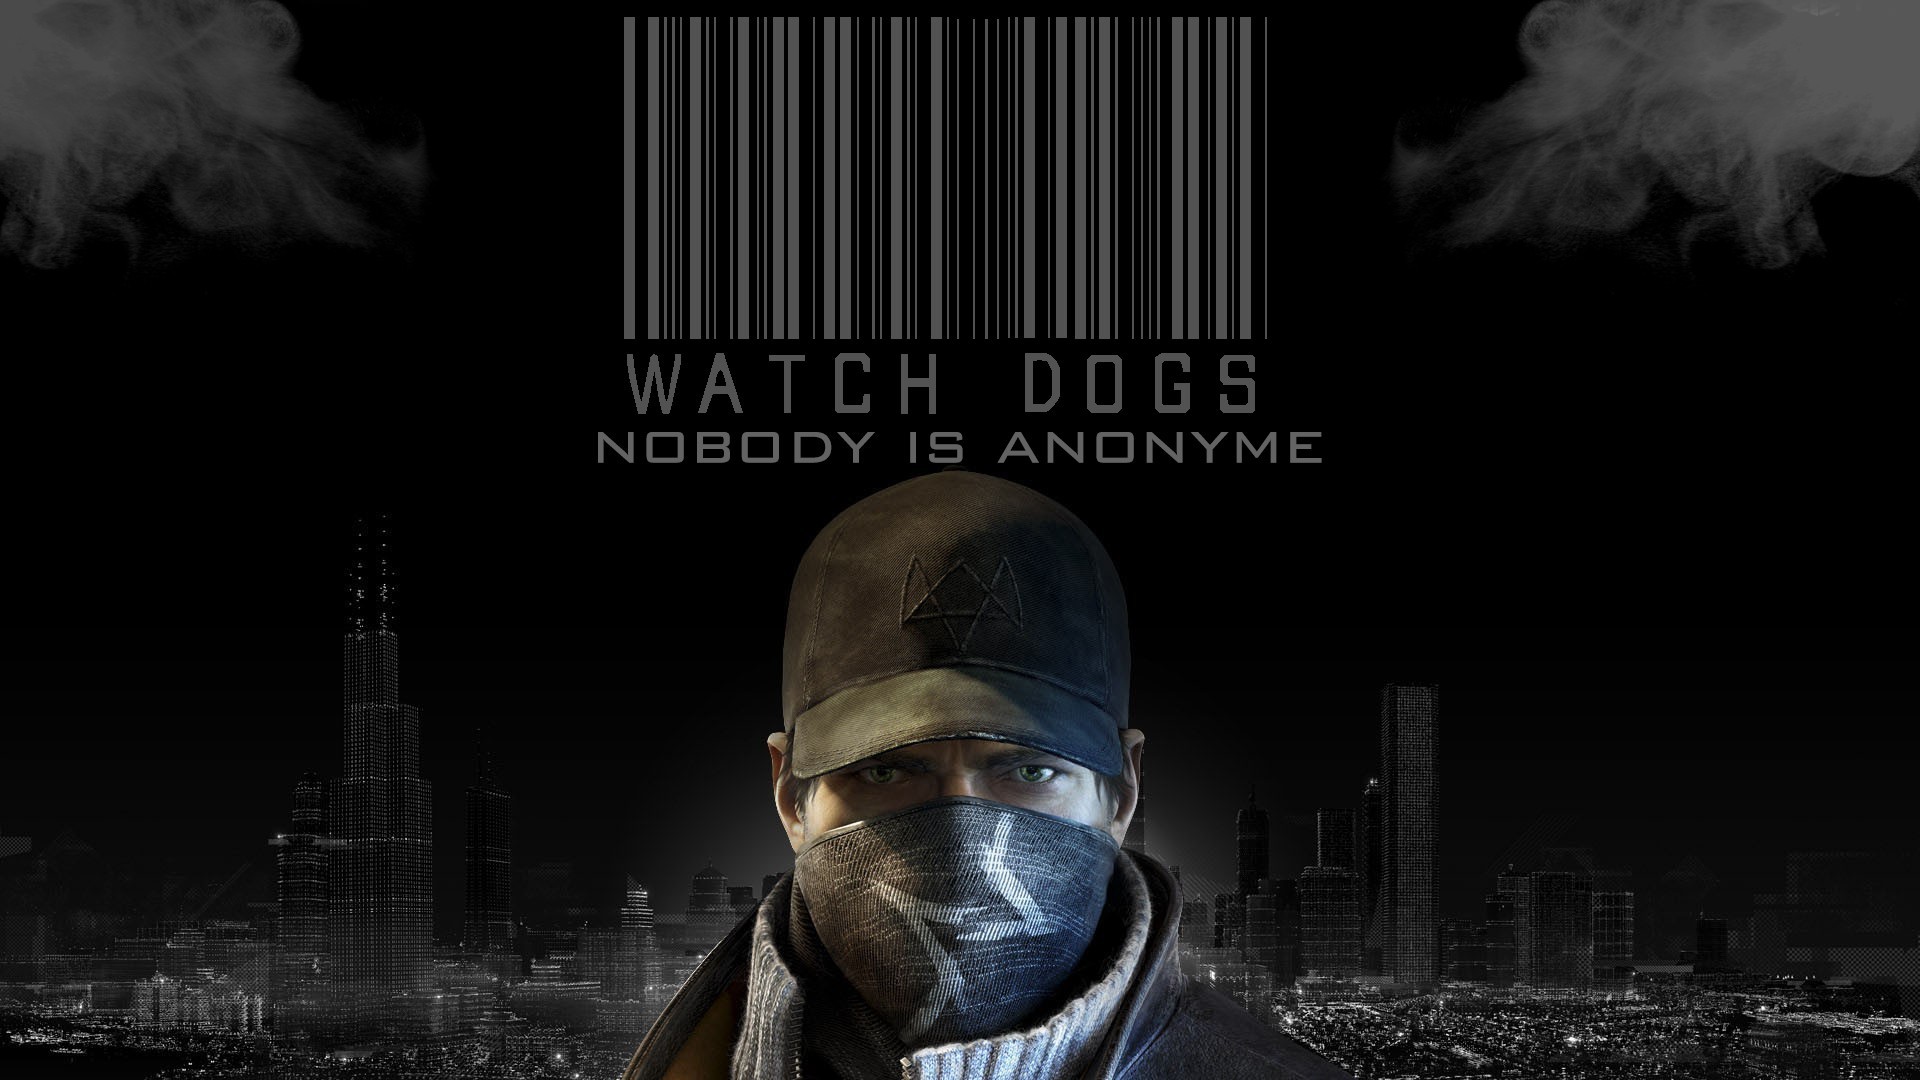 1920x1080 Search Results for “watch dogs logo wallpaper – Adorable Wallpapers